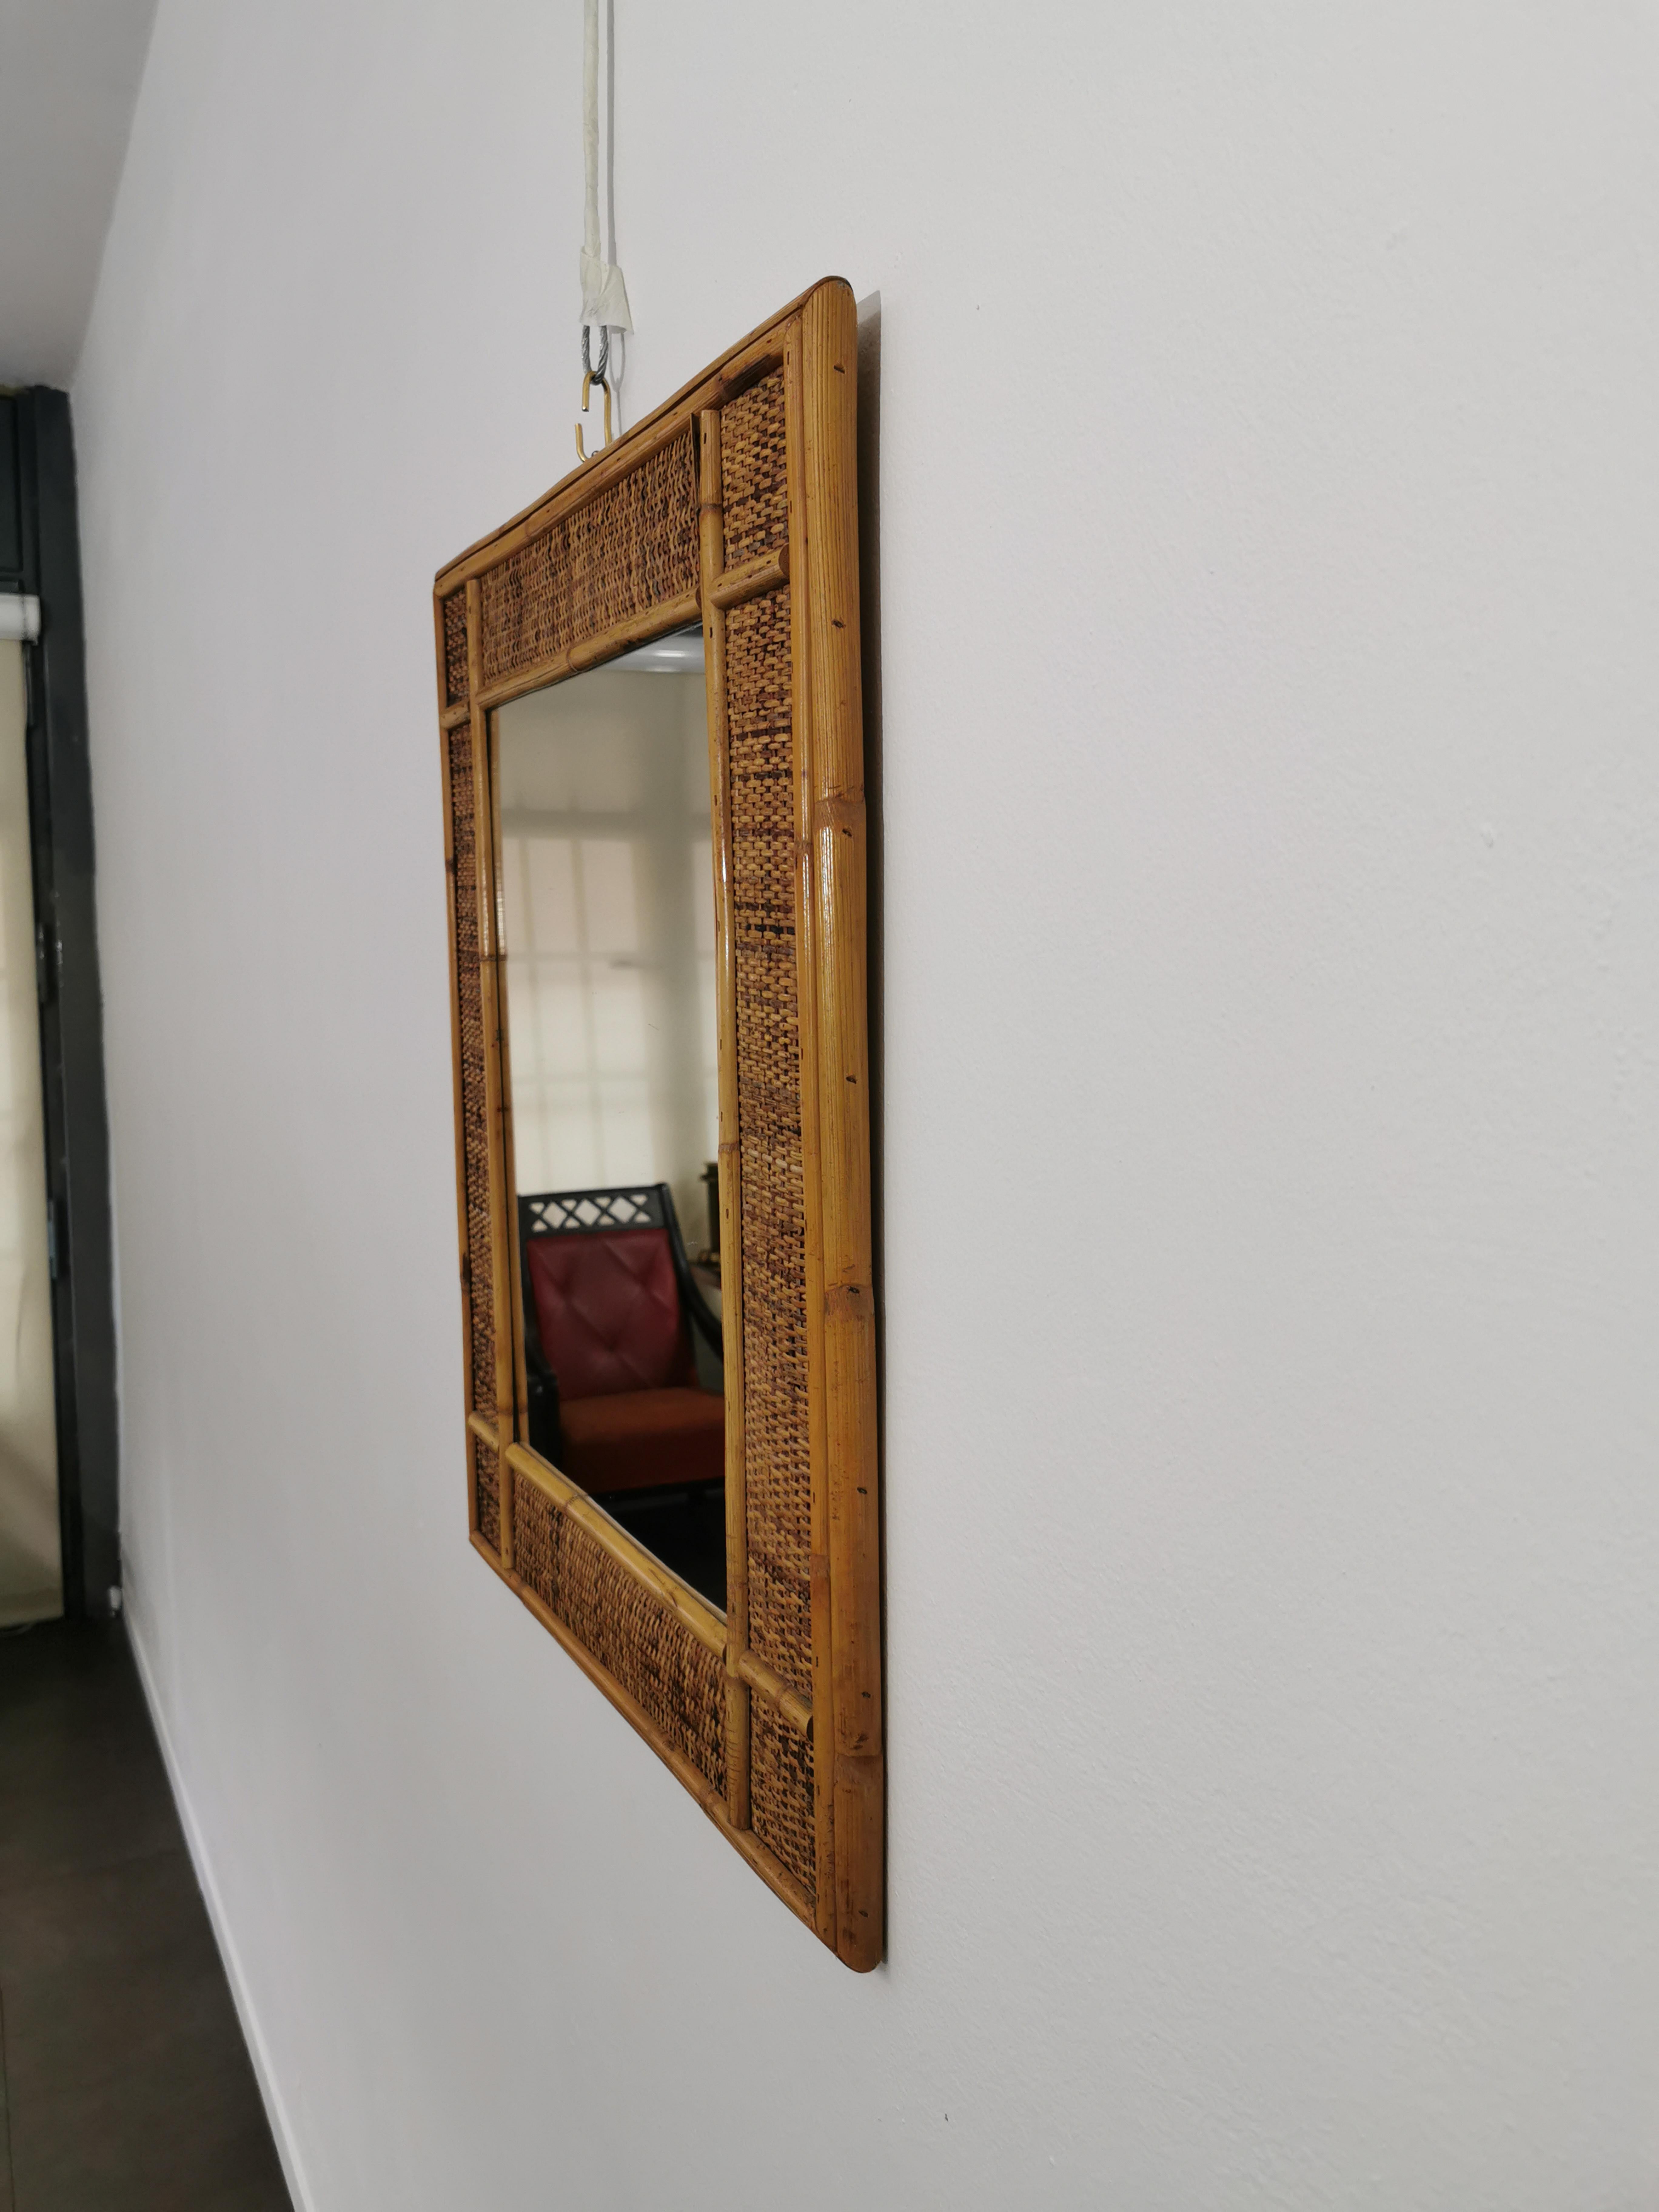 Rectangular wall mirror produced in Italy in the 1960s. The mirror was made of wicker and with a bamboo cane frame.